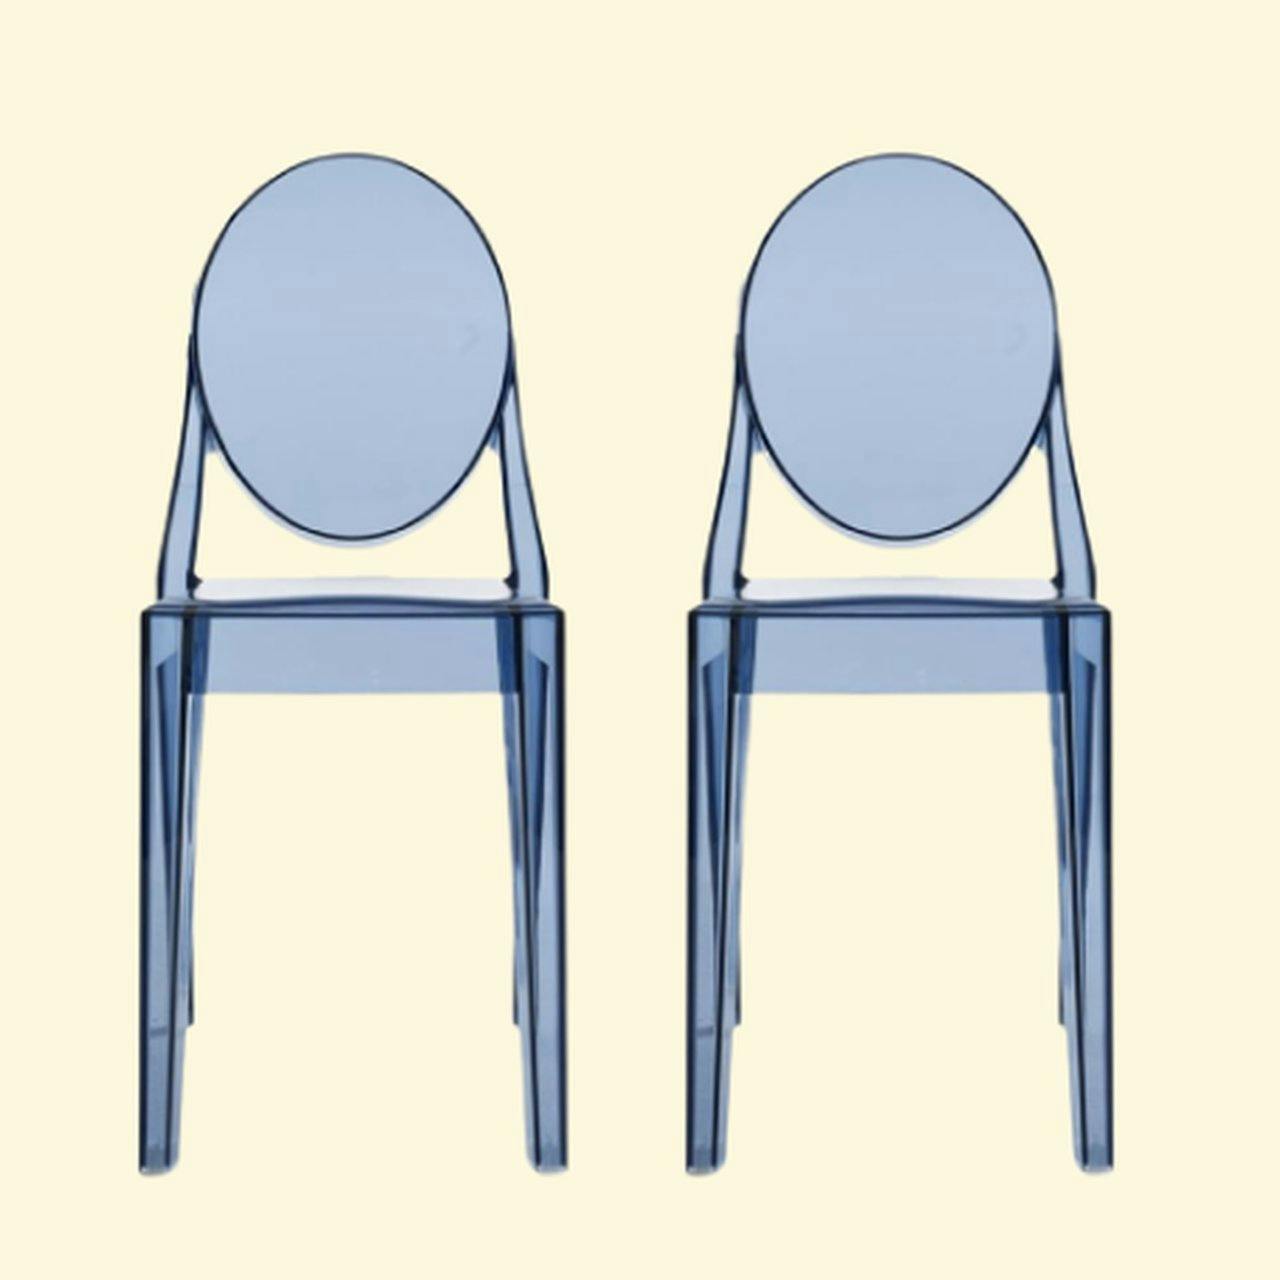 Arne Jacobsen Dining chairs